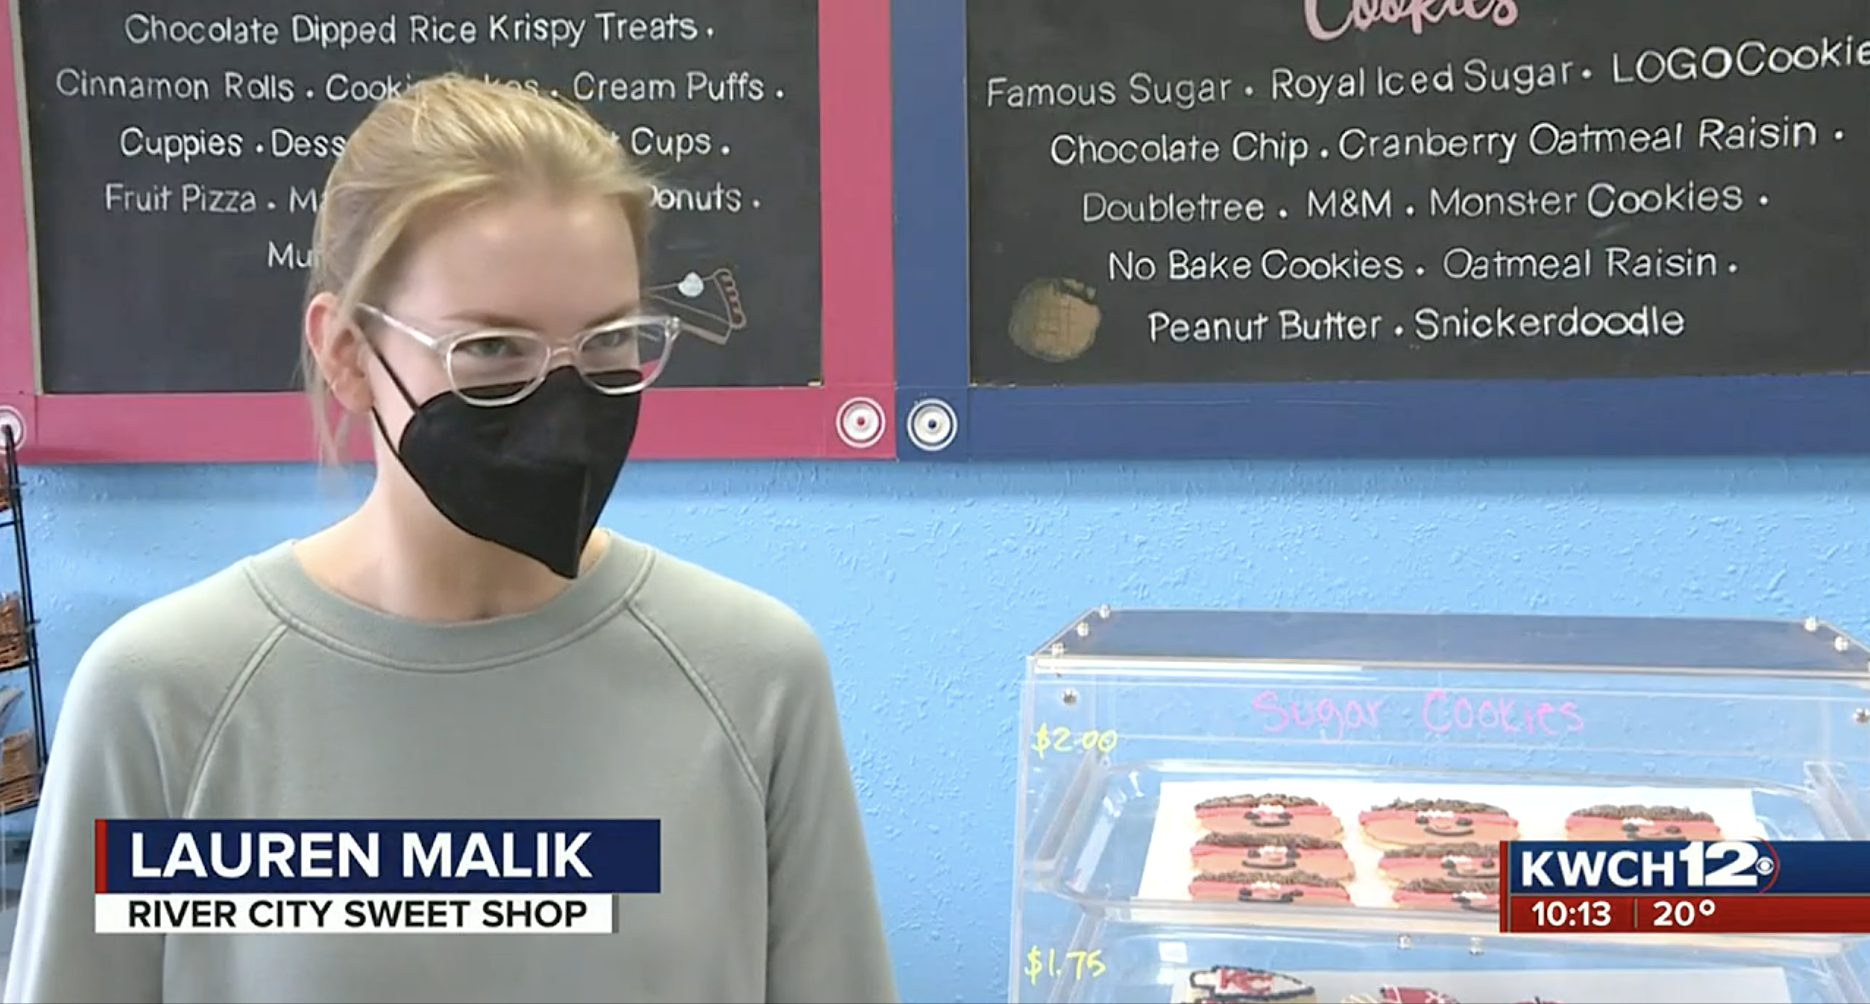 A screenshot from a news broadcast interview with Lauren, a baker at River City Sweet Shop